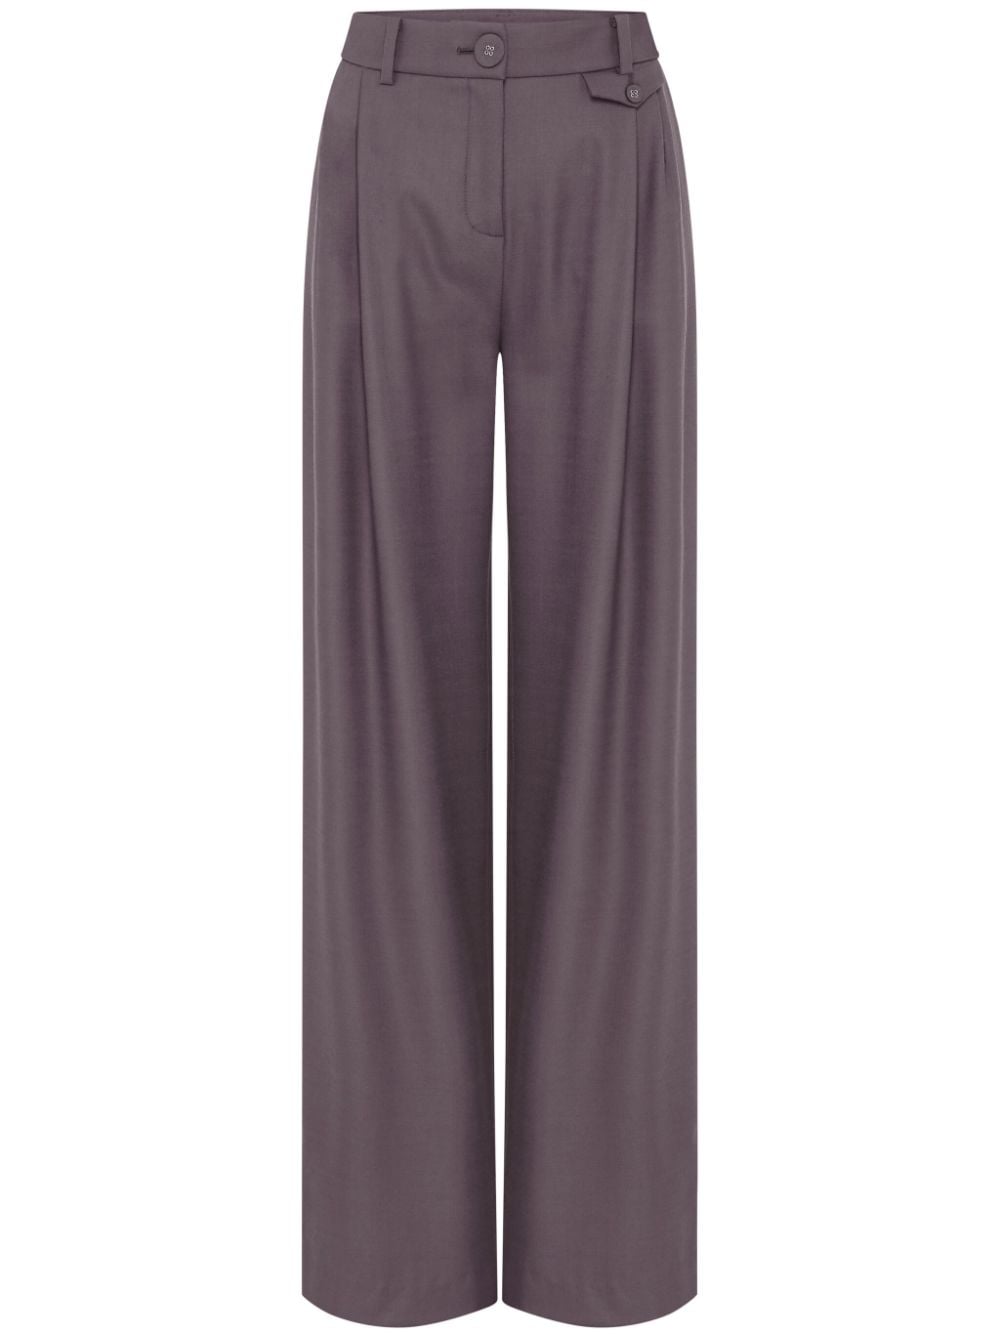 Topshop Petite Faux Leather Washed Effect High Waist Straight Leg Pants In  Gray